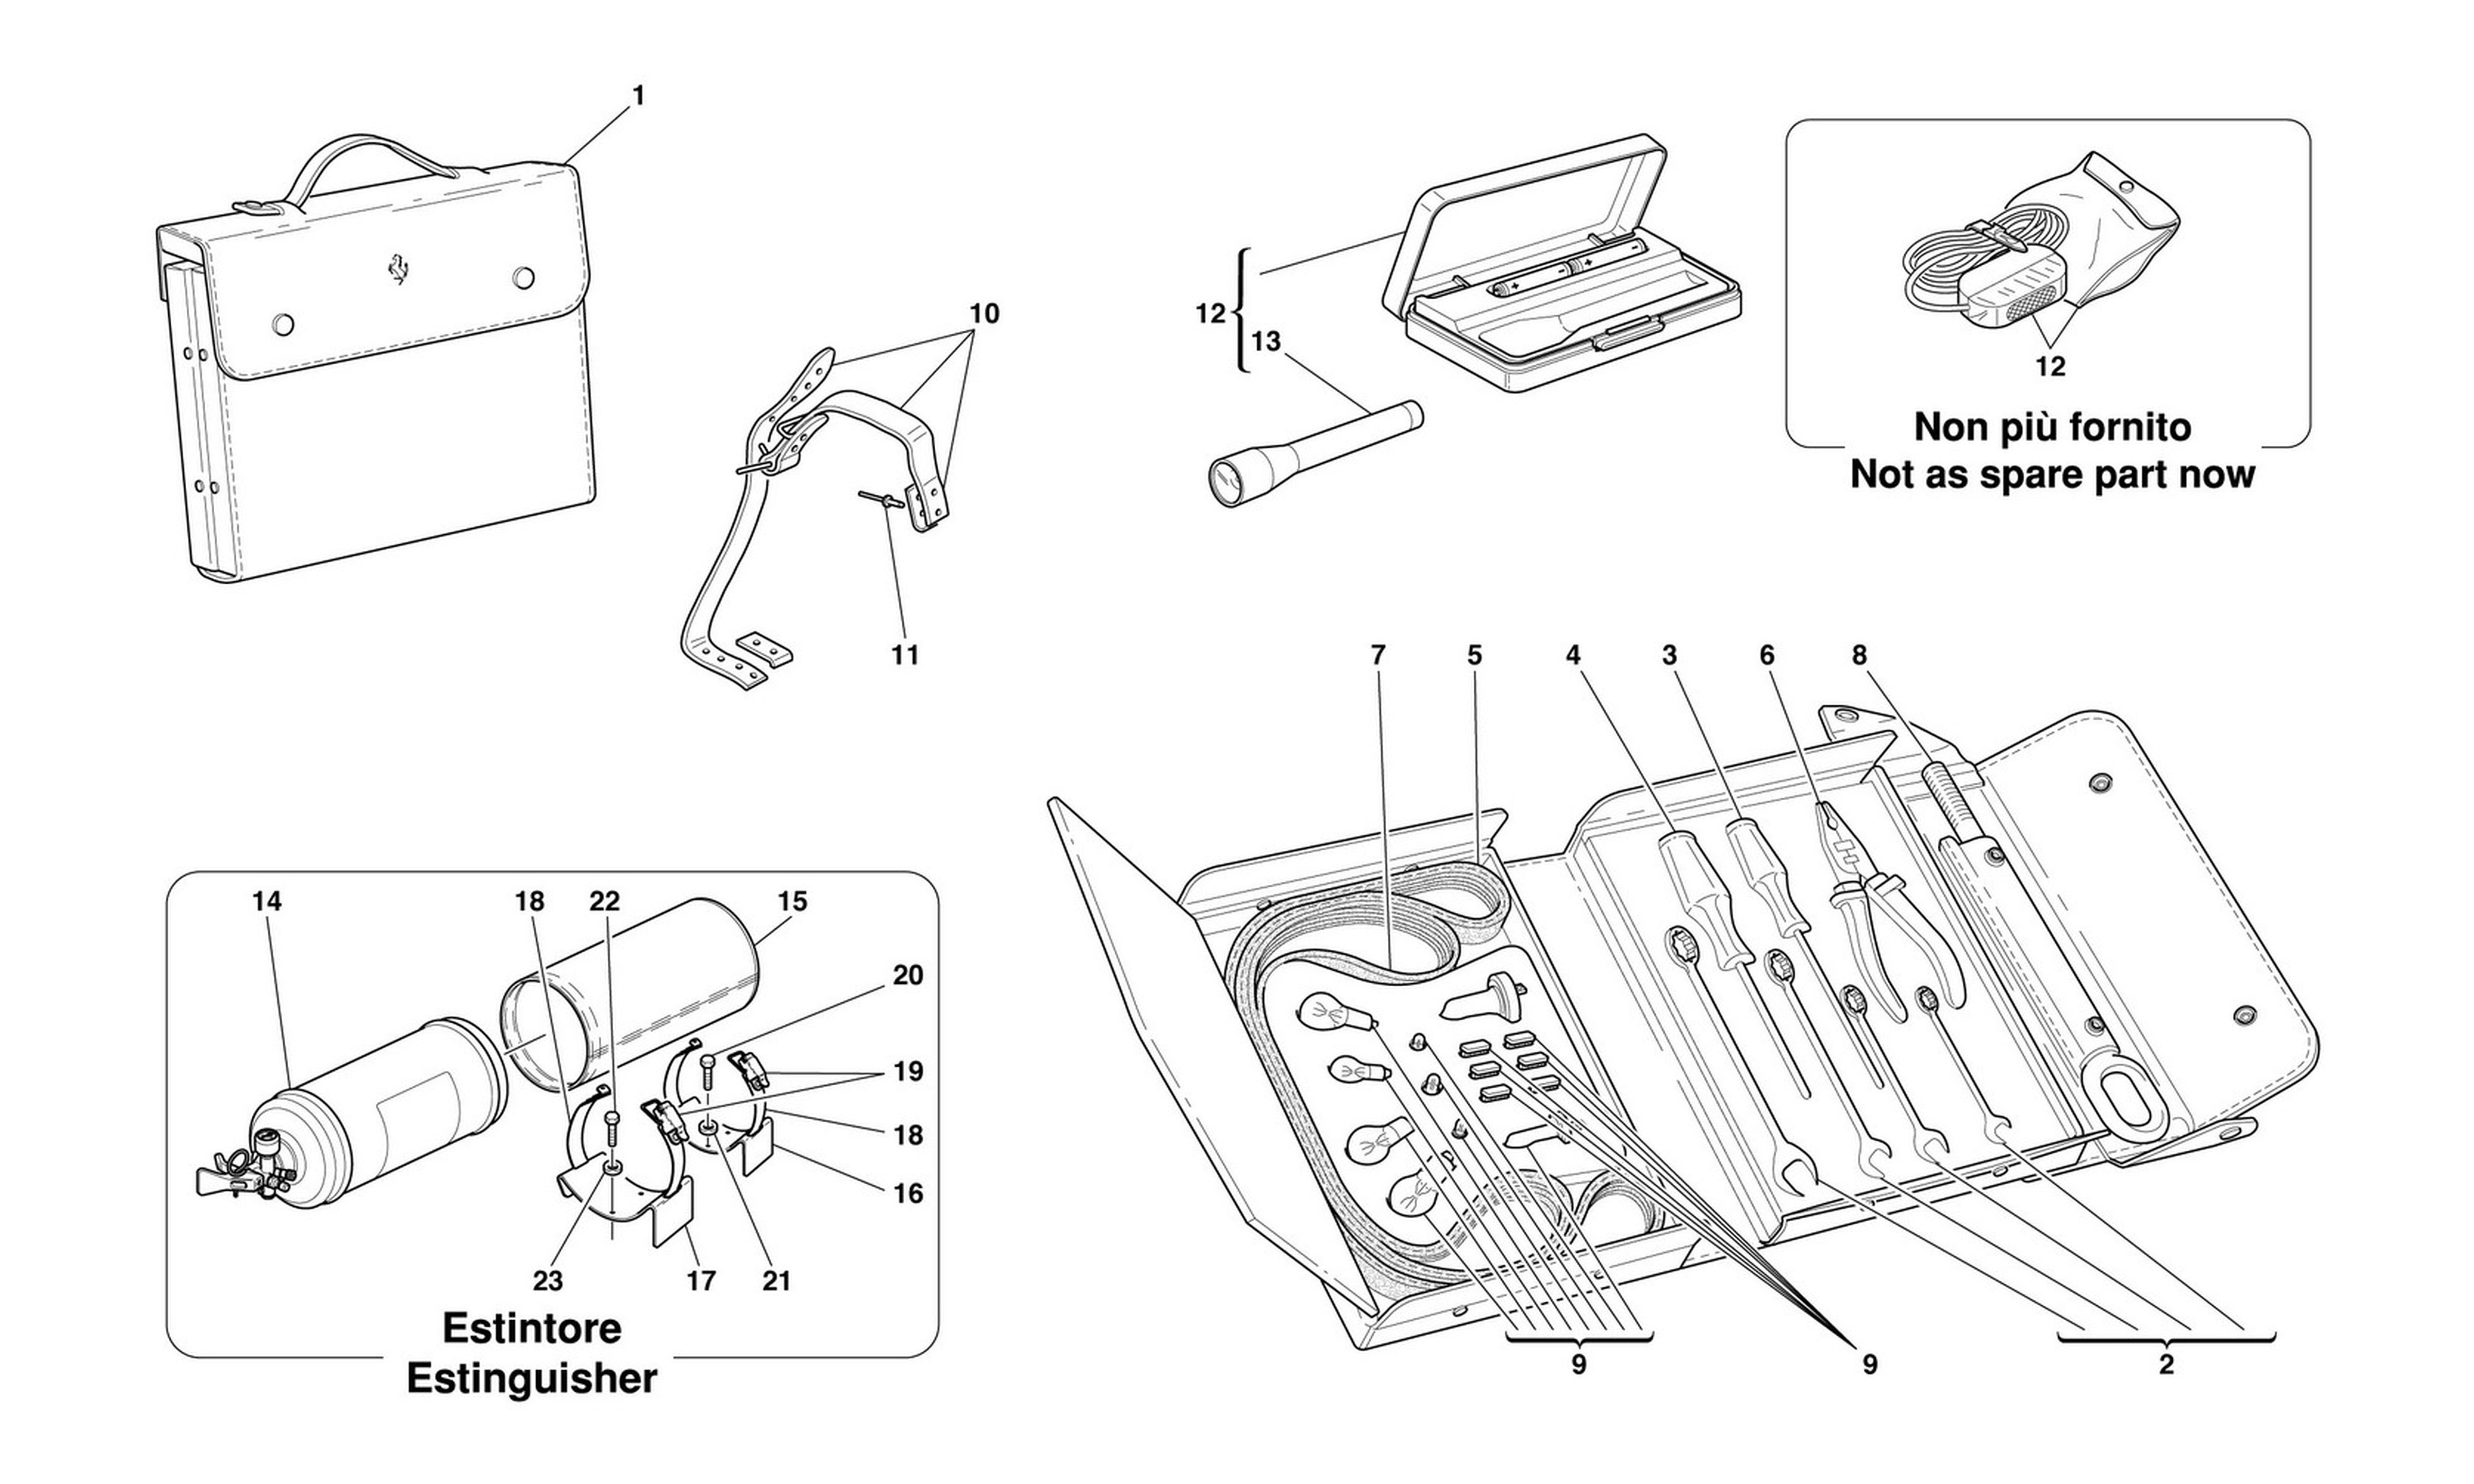 Schematic: Tools Equipment And Fixings